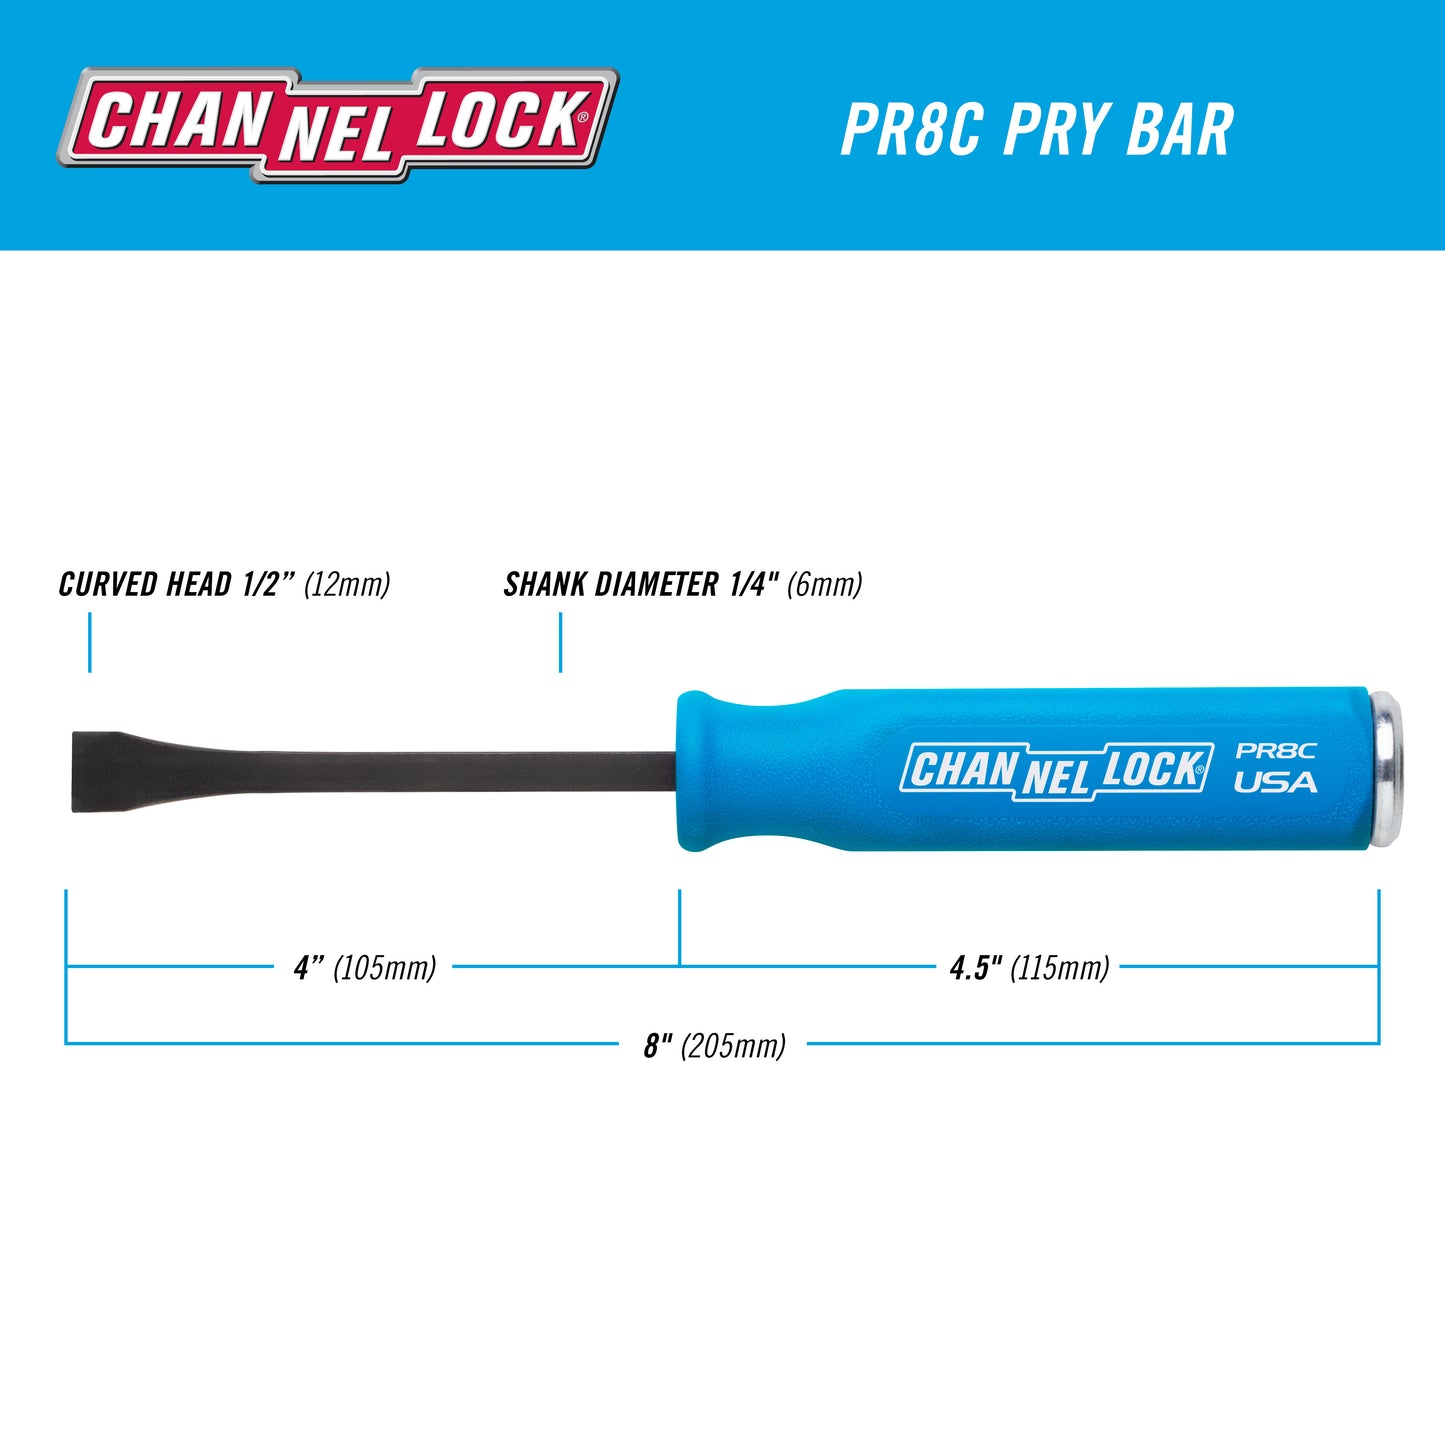 1/2 x 4-inch Professional Pry Bar, 8-inch Overall Length (PR8C)